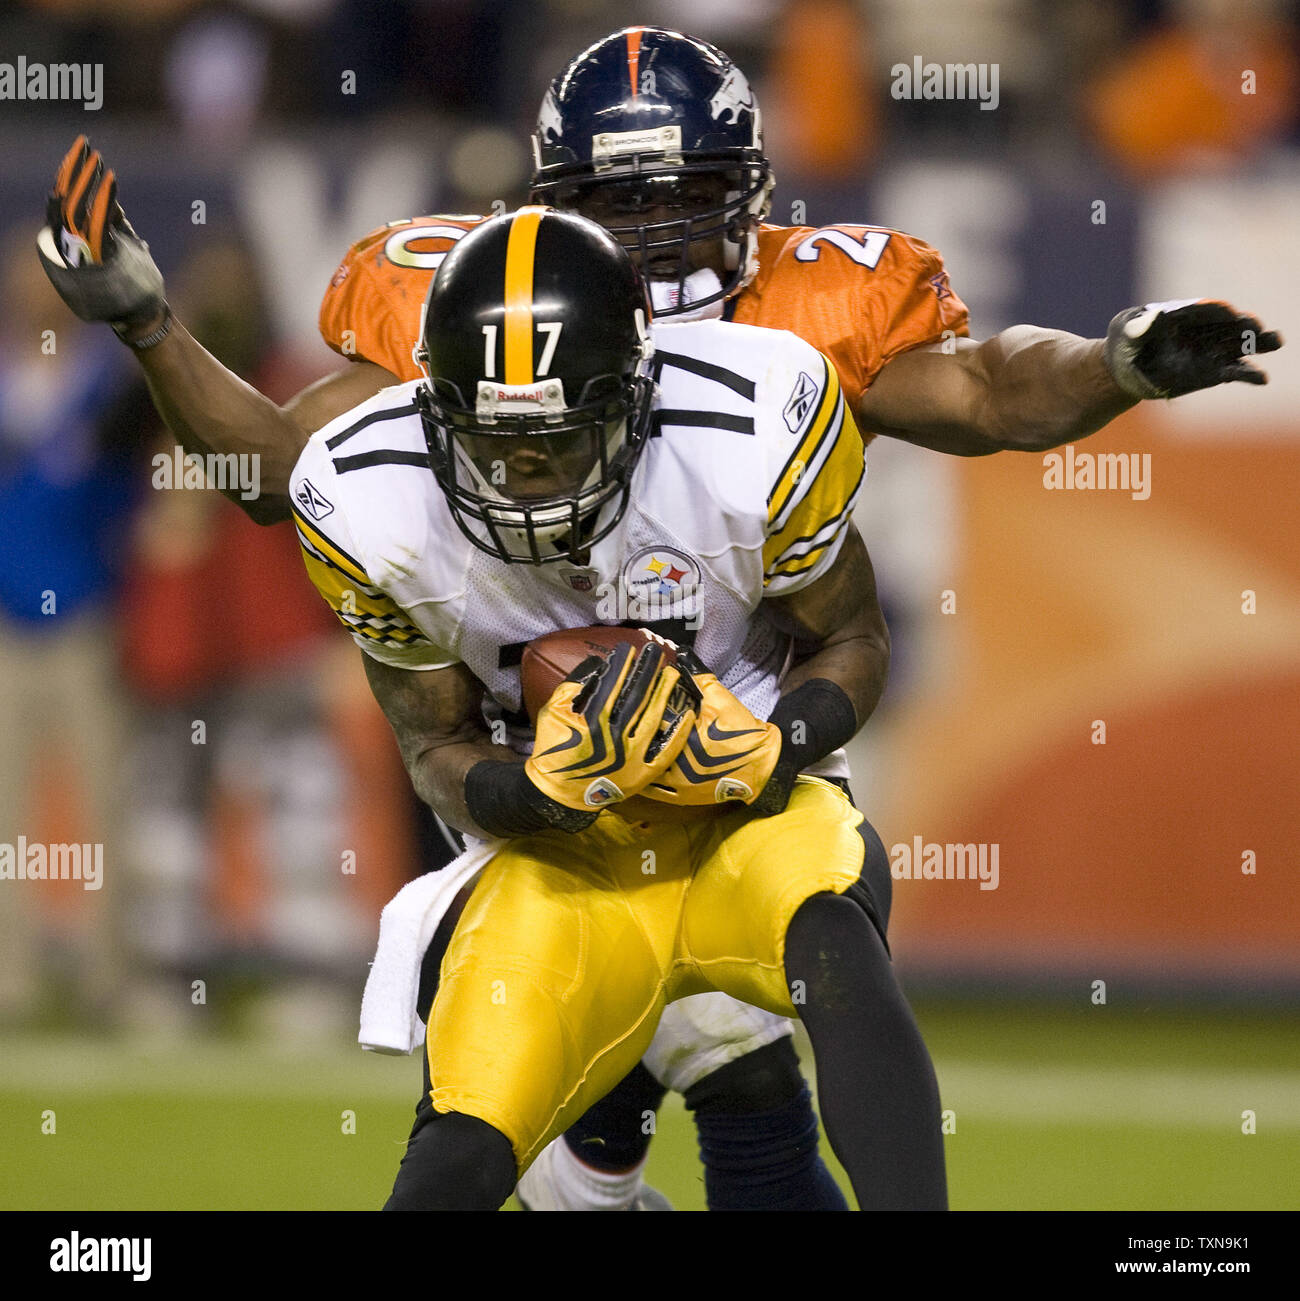 Pittsburgh Steelers flanker Mike Wallace grabs a 25-yard touchdown pass against Denver Broncos safety Brian Dawkins during the fourth quarter at Invesco Field at Mile High in Denver on November 9, 2009.   Pittsburgh (6-2) beat Denver  (6-2) 28-10.    UPI/Gary C. Caskey... Stock Photo